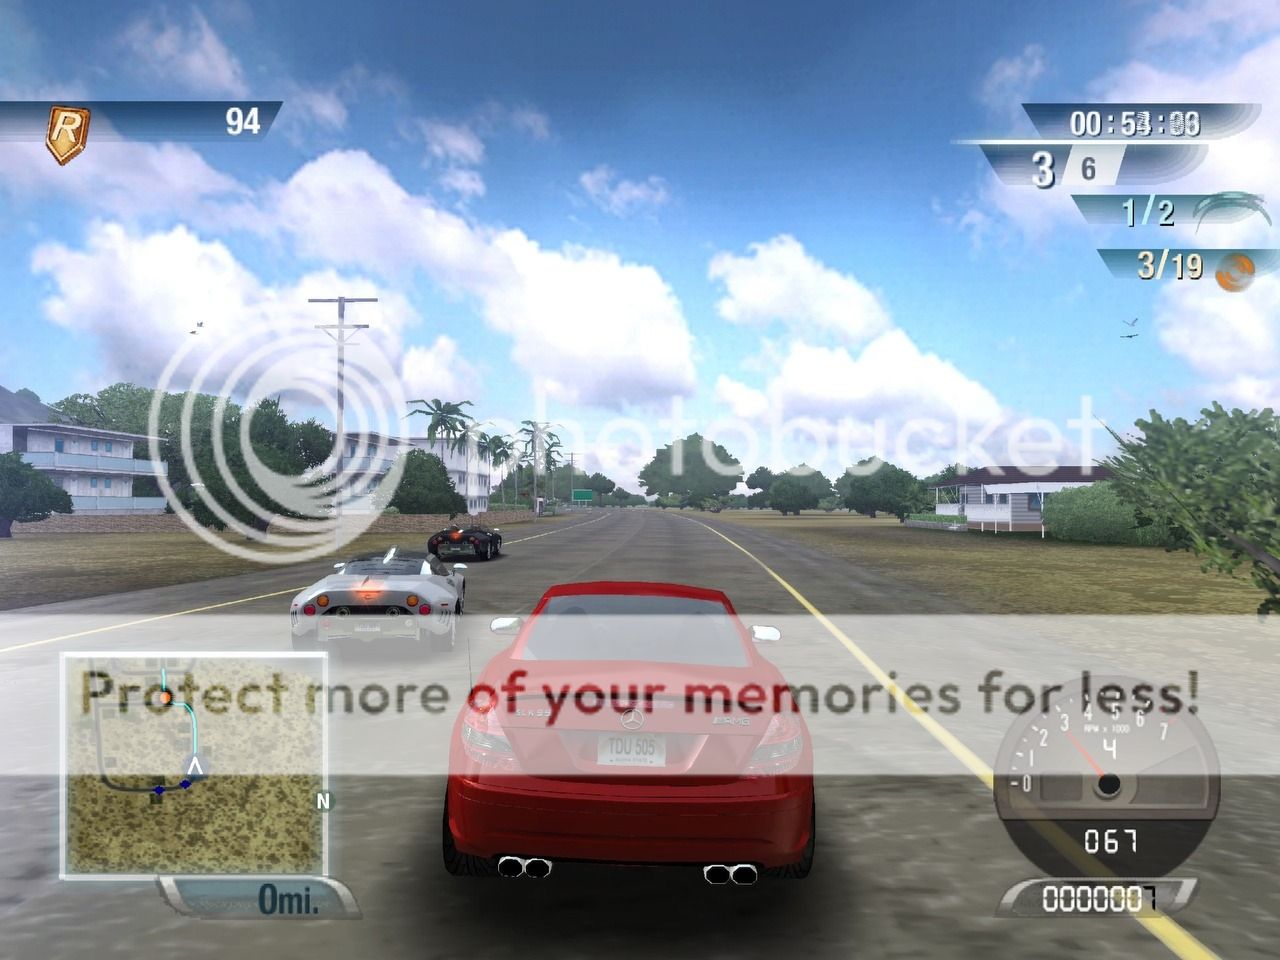 test drive unlimited 1 pc iso